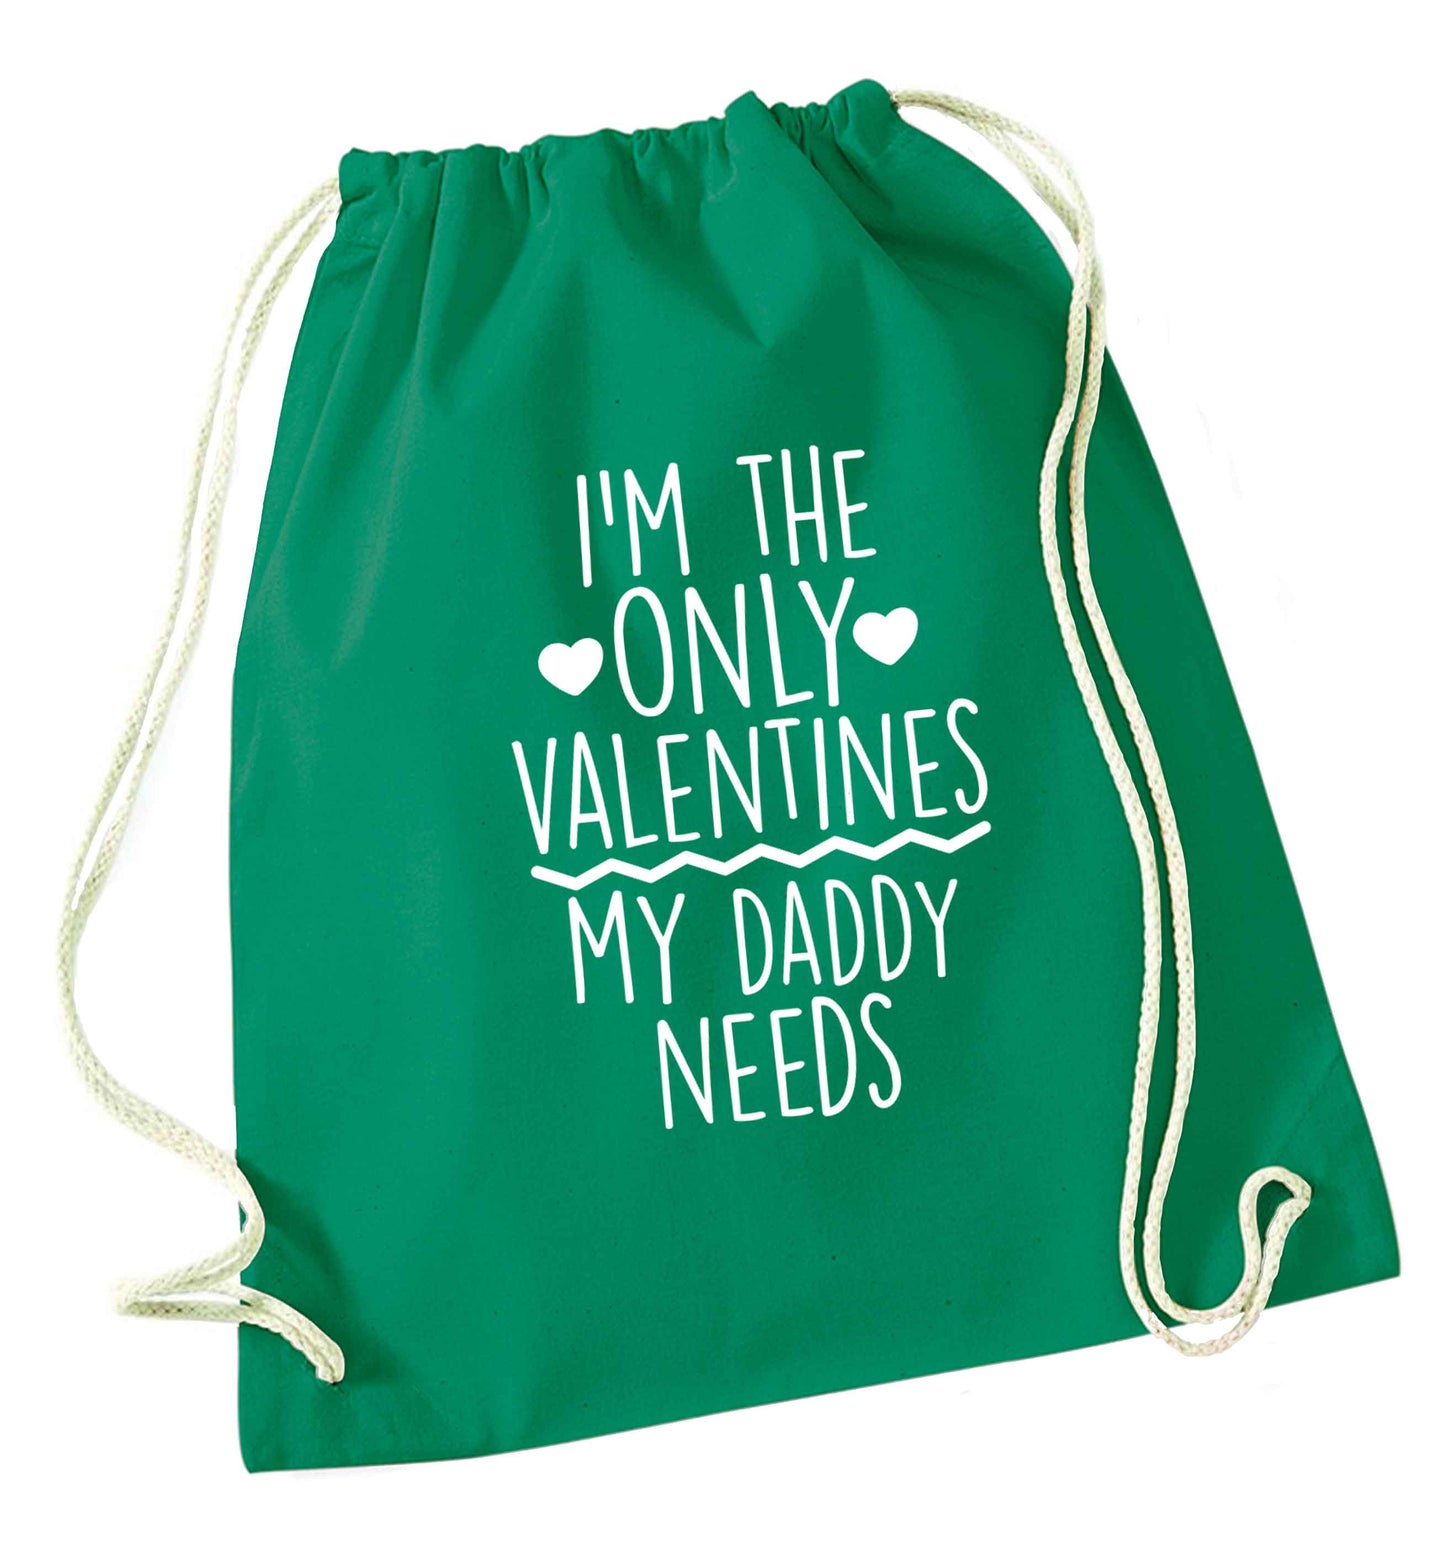 I'm the only valentines my daddy needs green drawstring bag